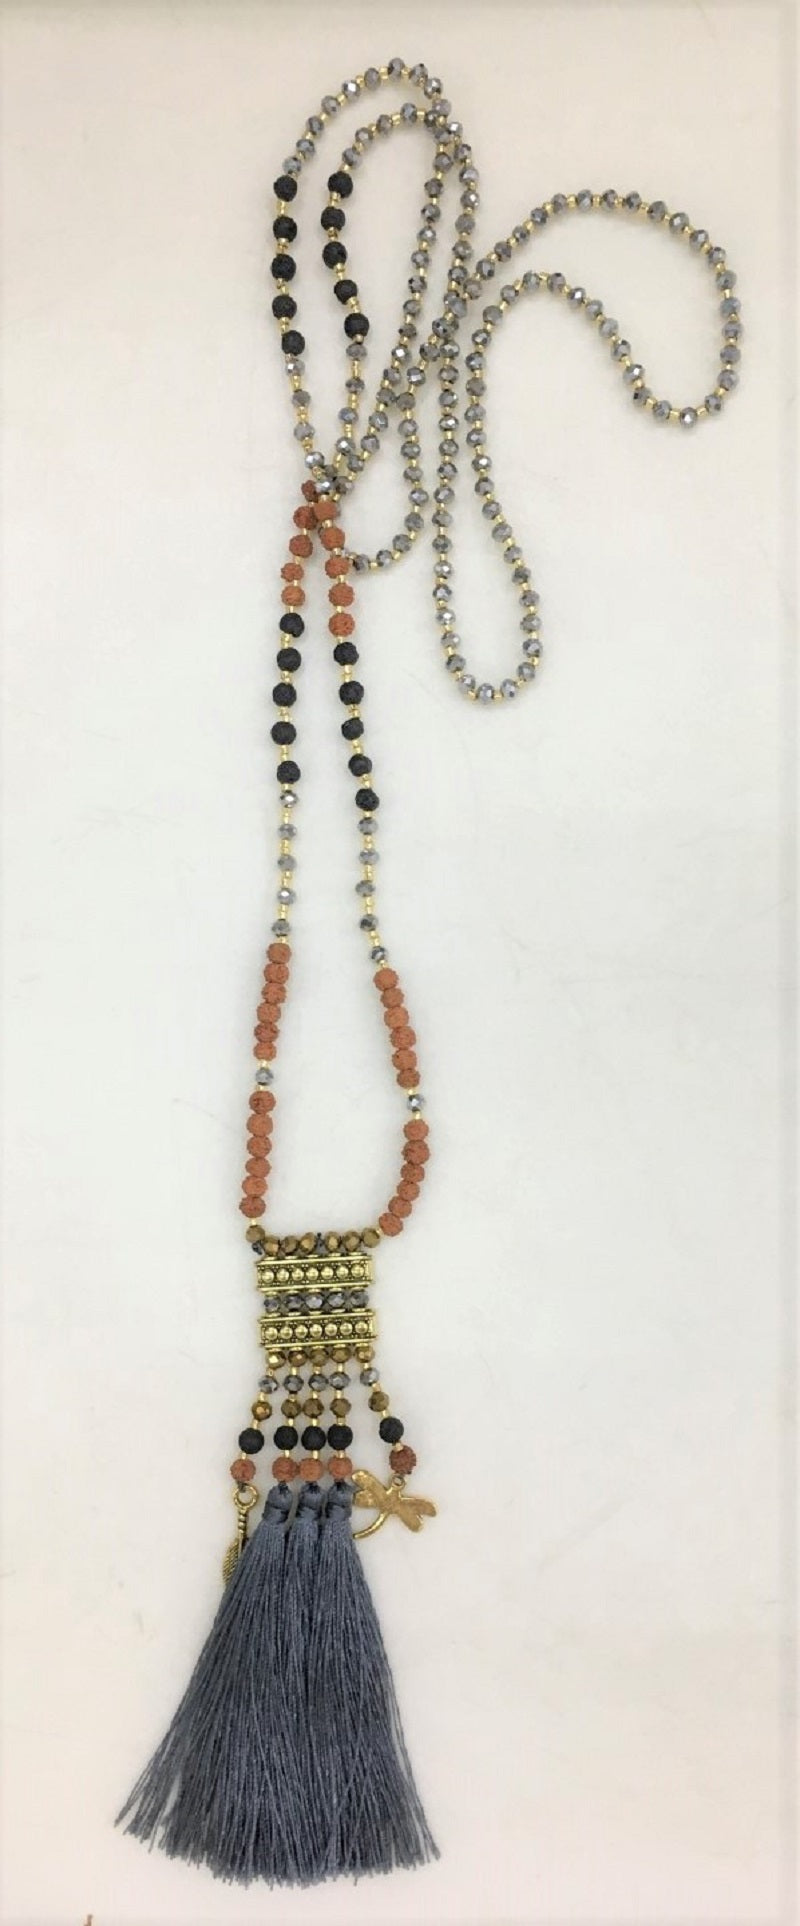 necklace - grey - crystal/mala/gold square - long